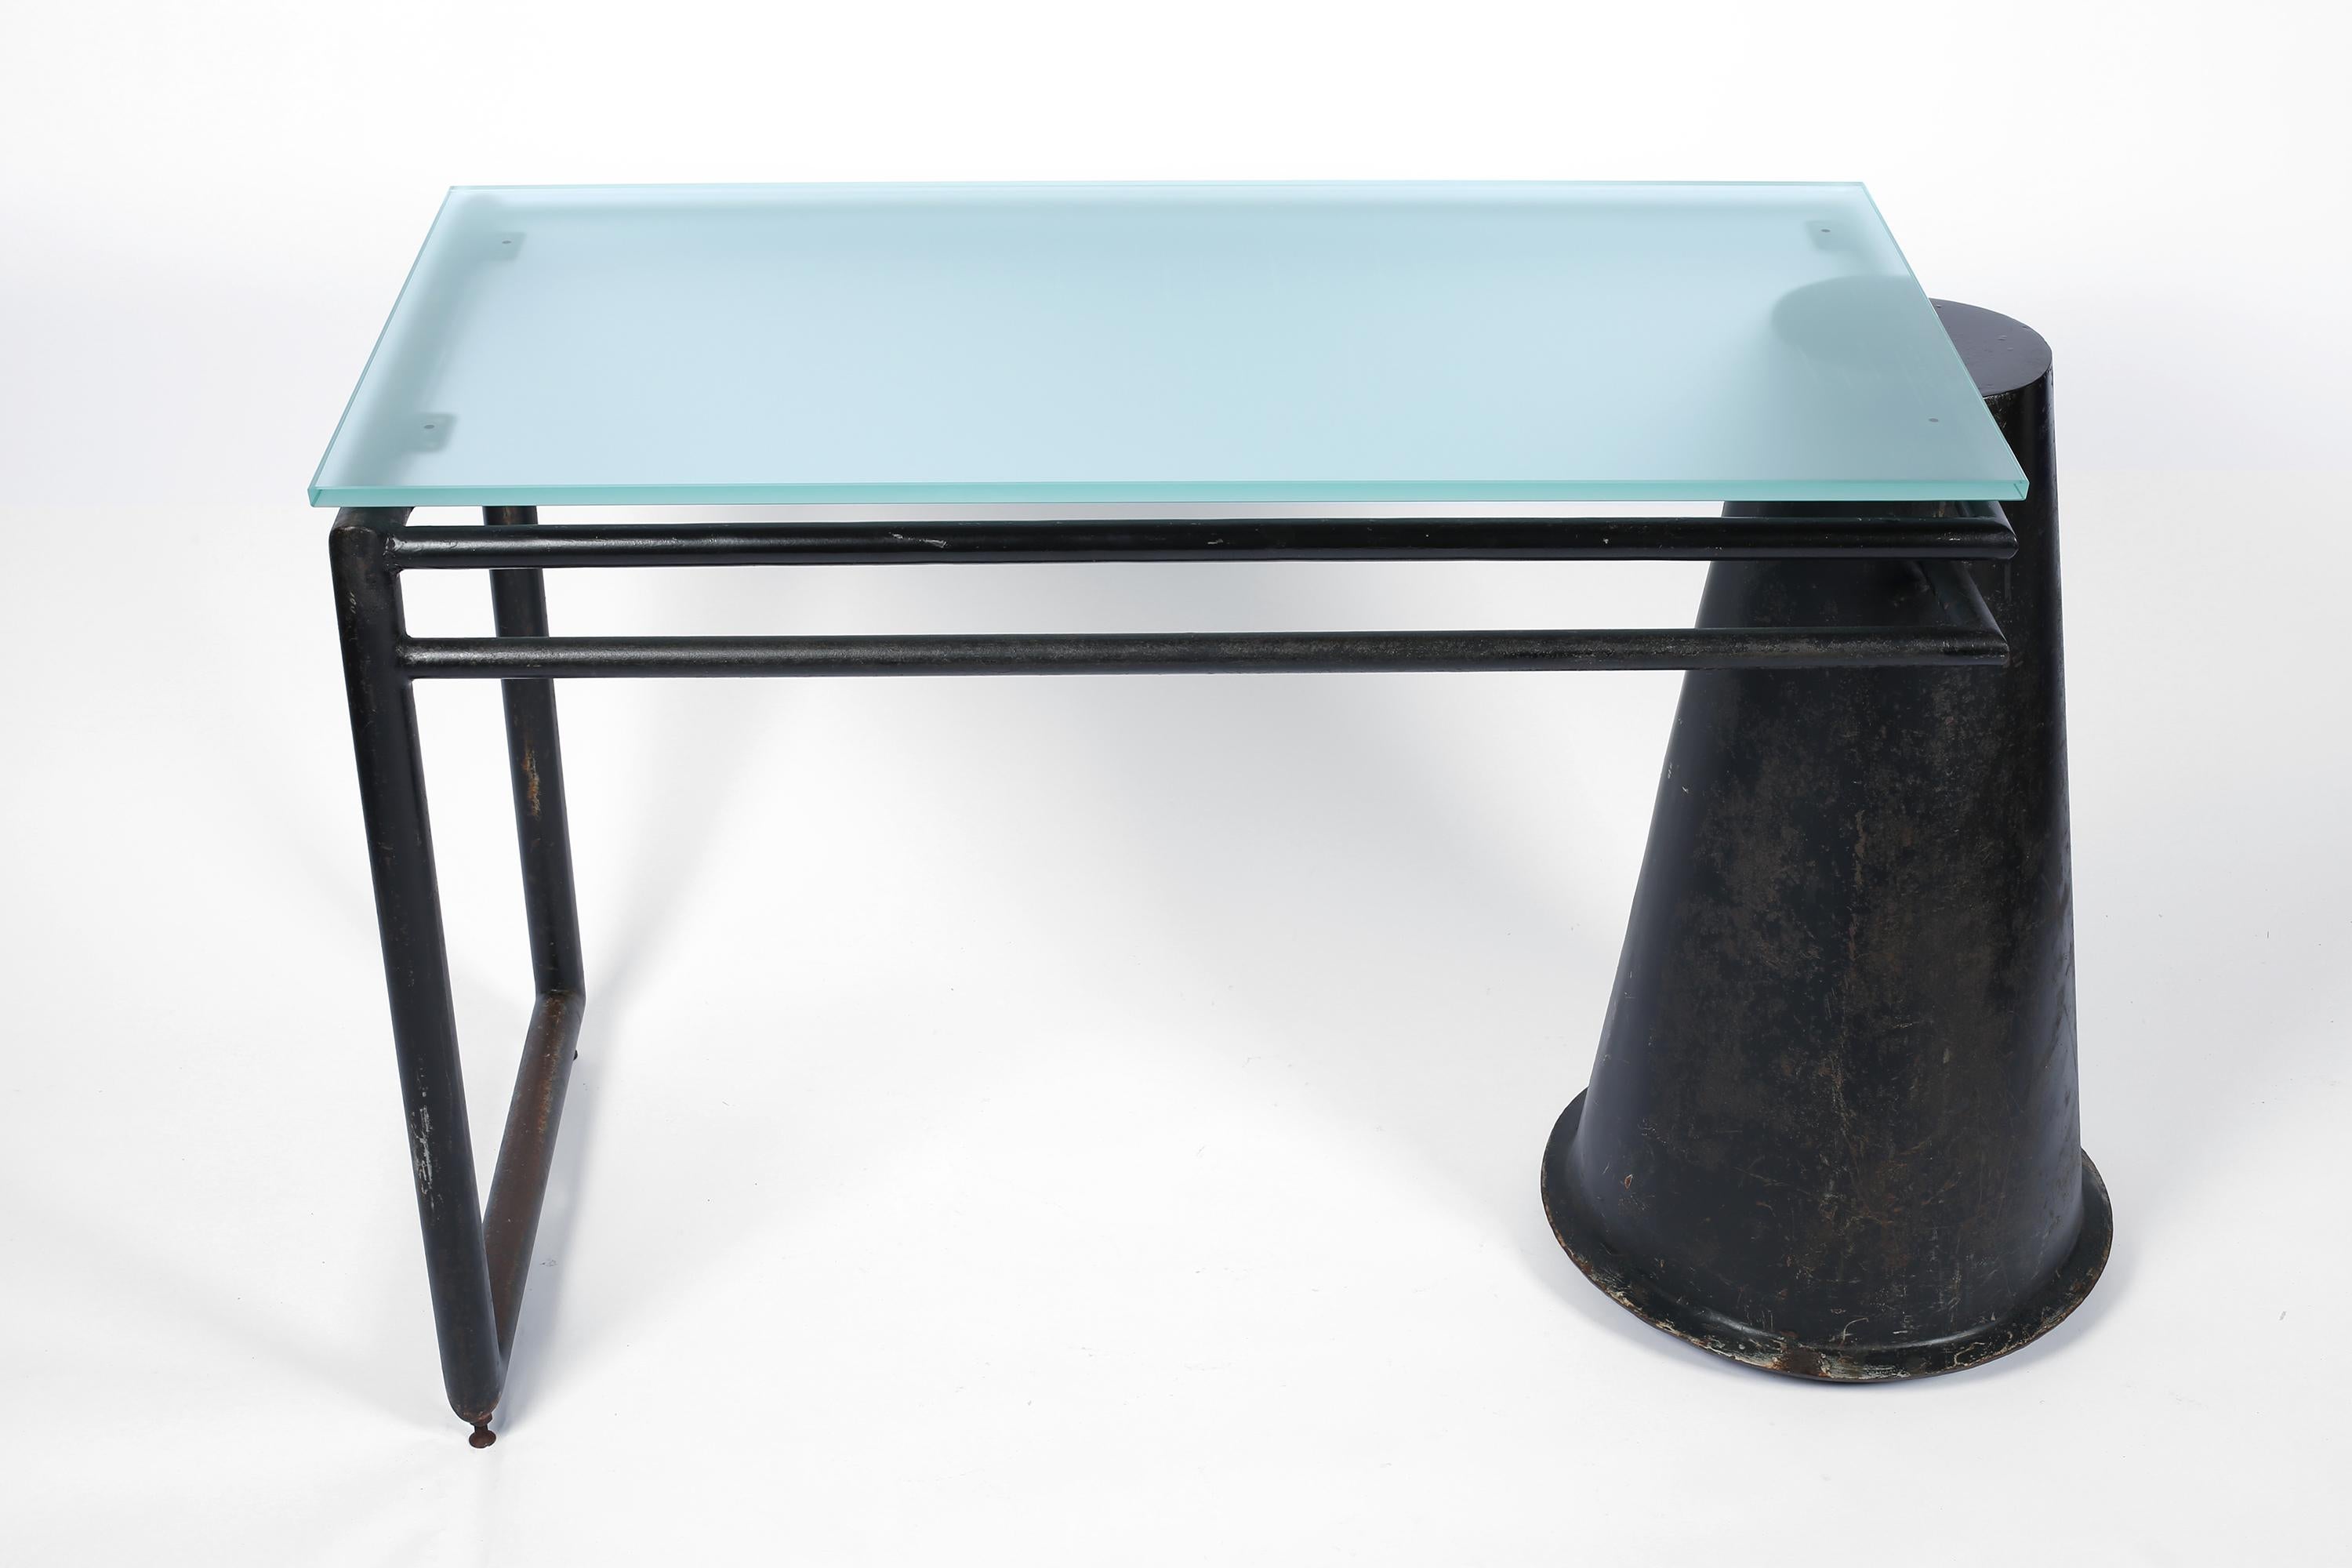 Modernist Steel and Glass Desk, French Early-Mid 20th Century For Sale 1